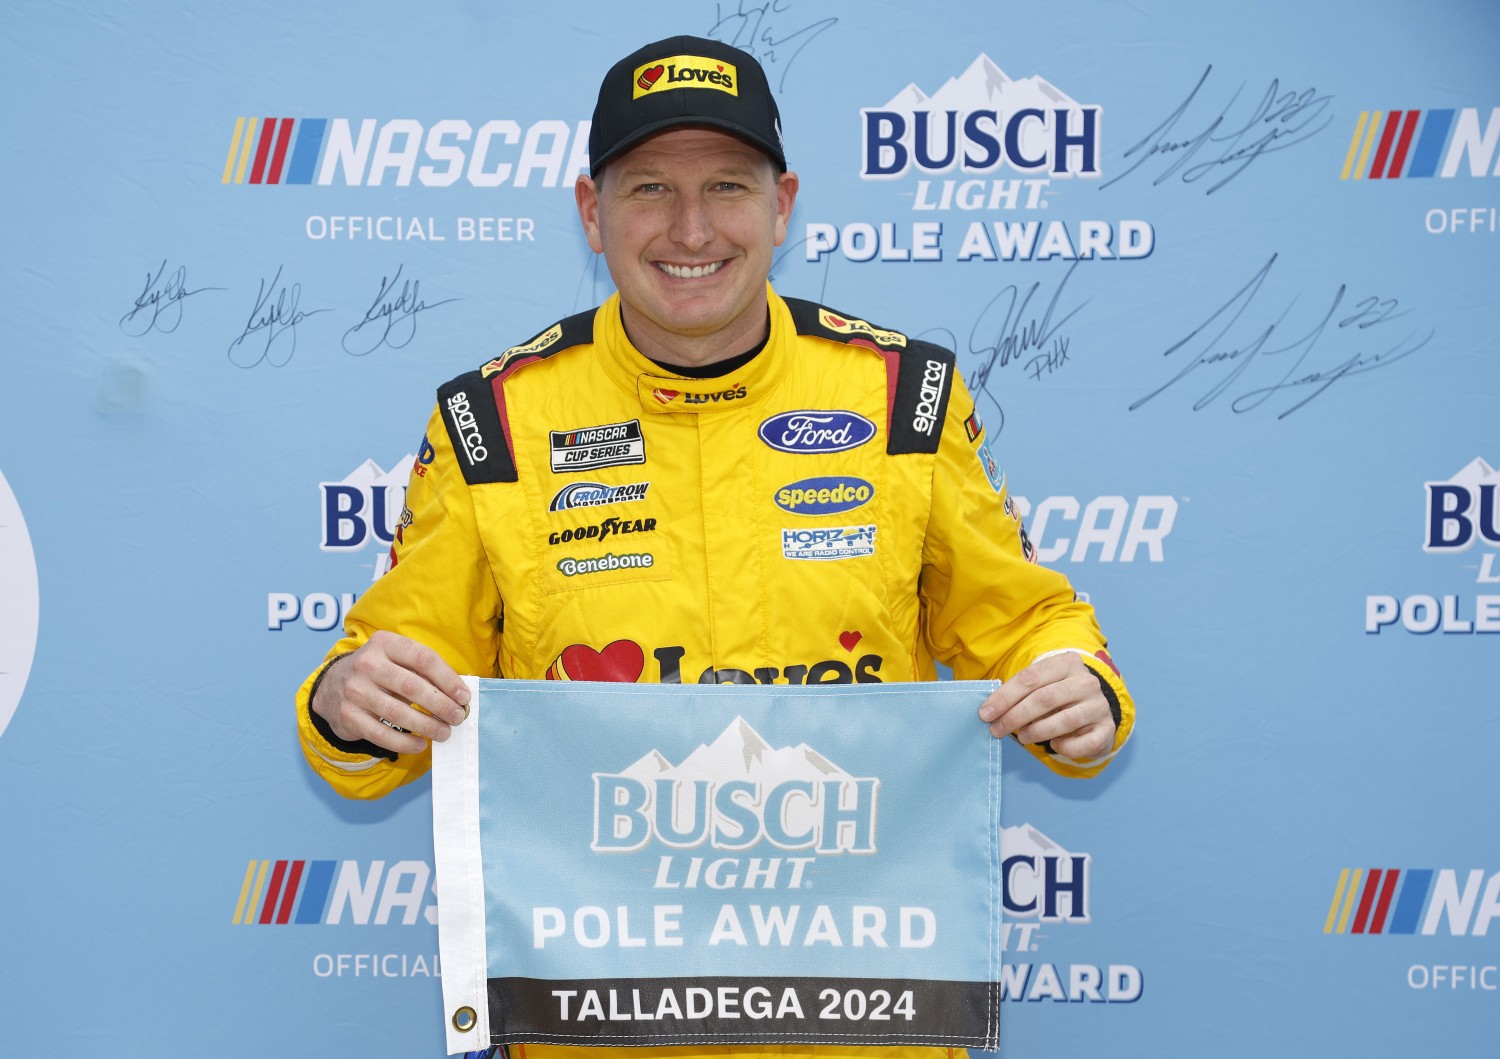 Michael McDowell, driver of the #34 Love's Travel Stops Ford, poses for photos after winning the pole award during qualifying for the NASCAR Cup Series GEICO 500 at Talladega Superspeedway on April 20, 2024 in Talladega, Alabama. (Photo by Sean Gardner/Getty Images)